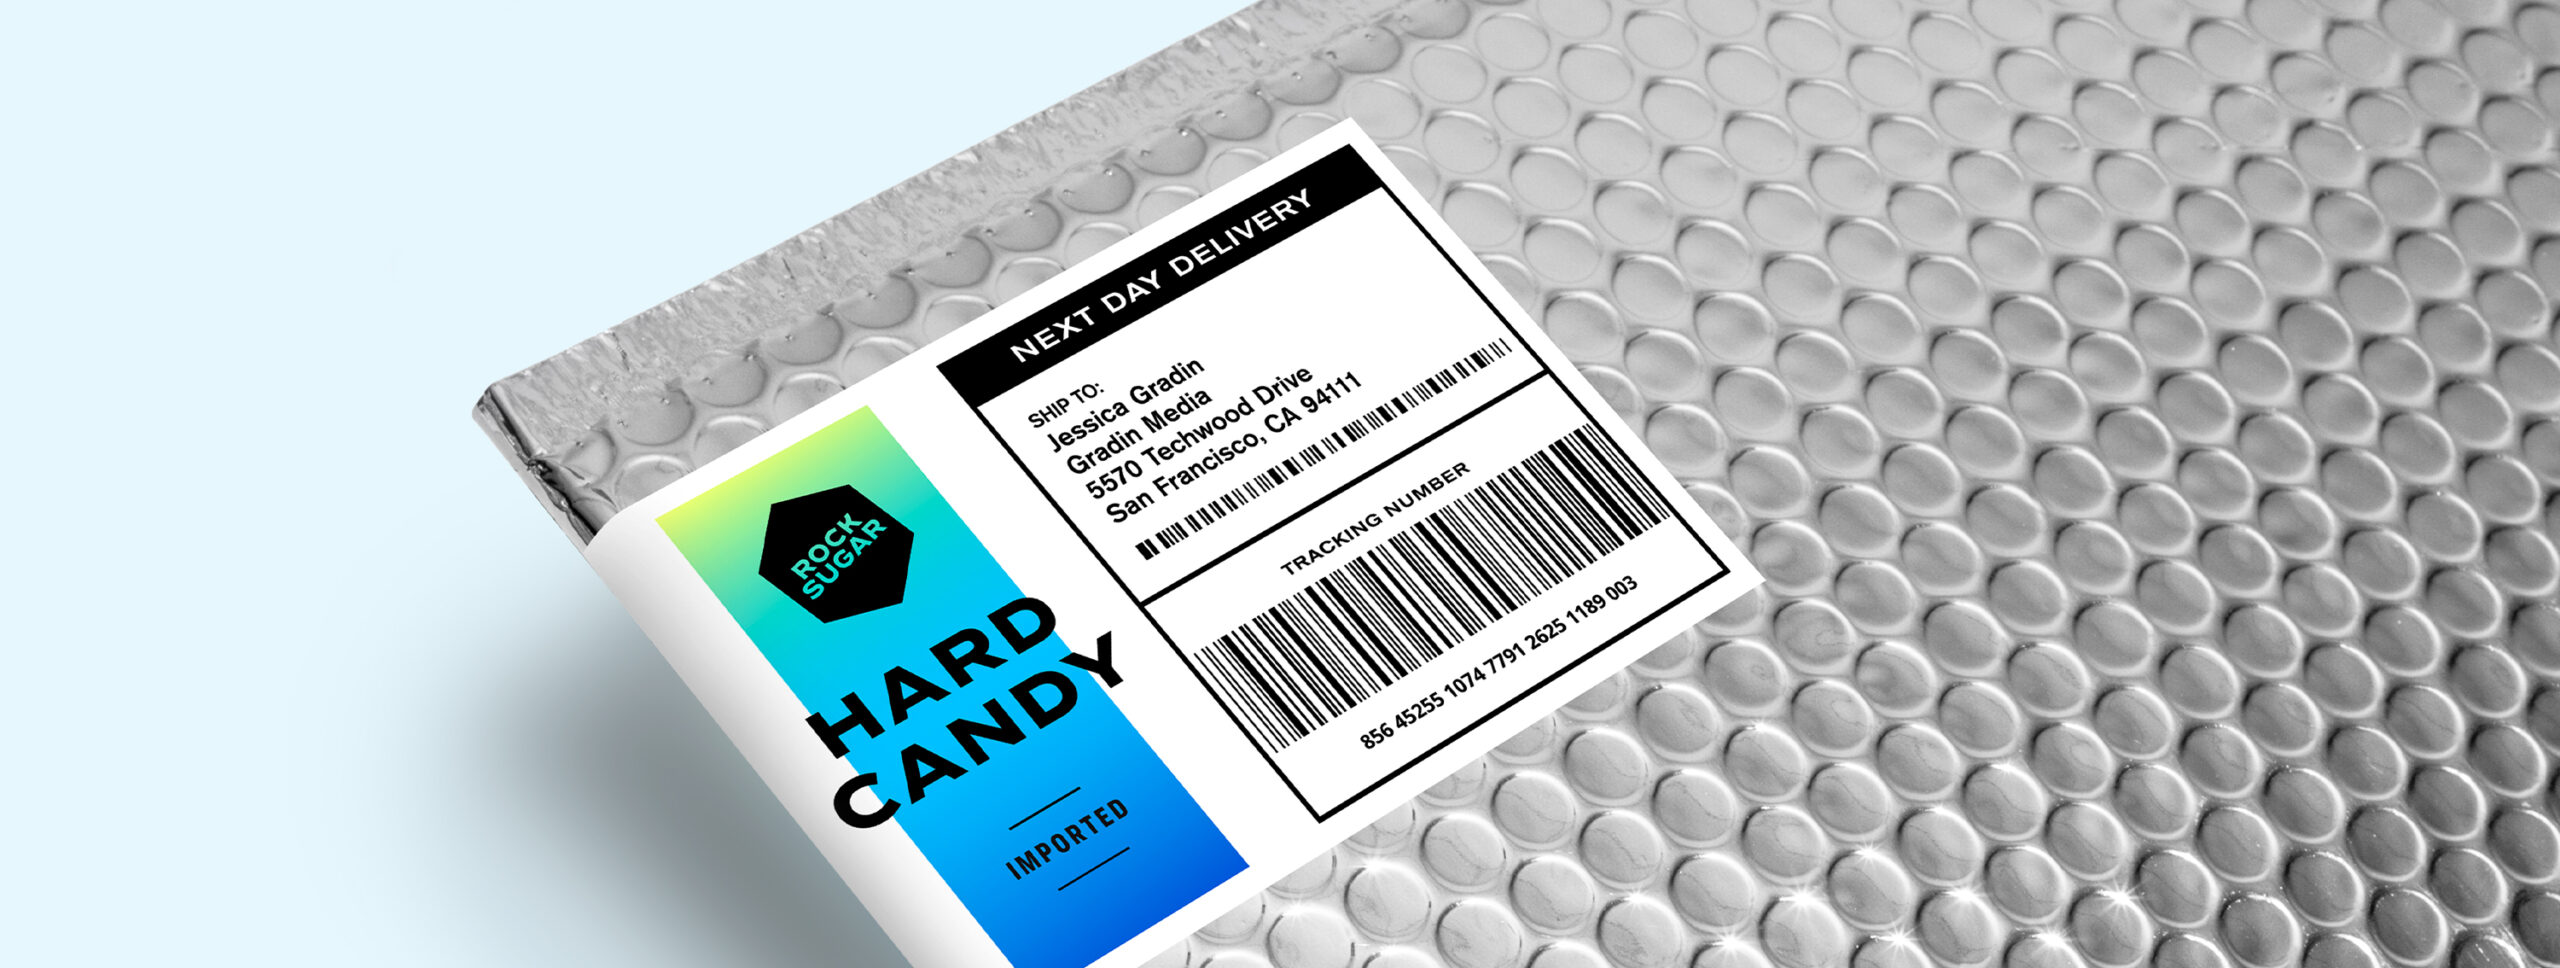 How to Make Your Own Barcodes | Avery.com